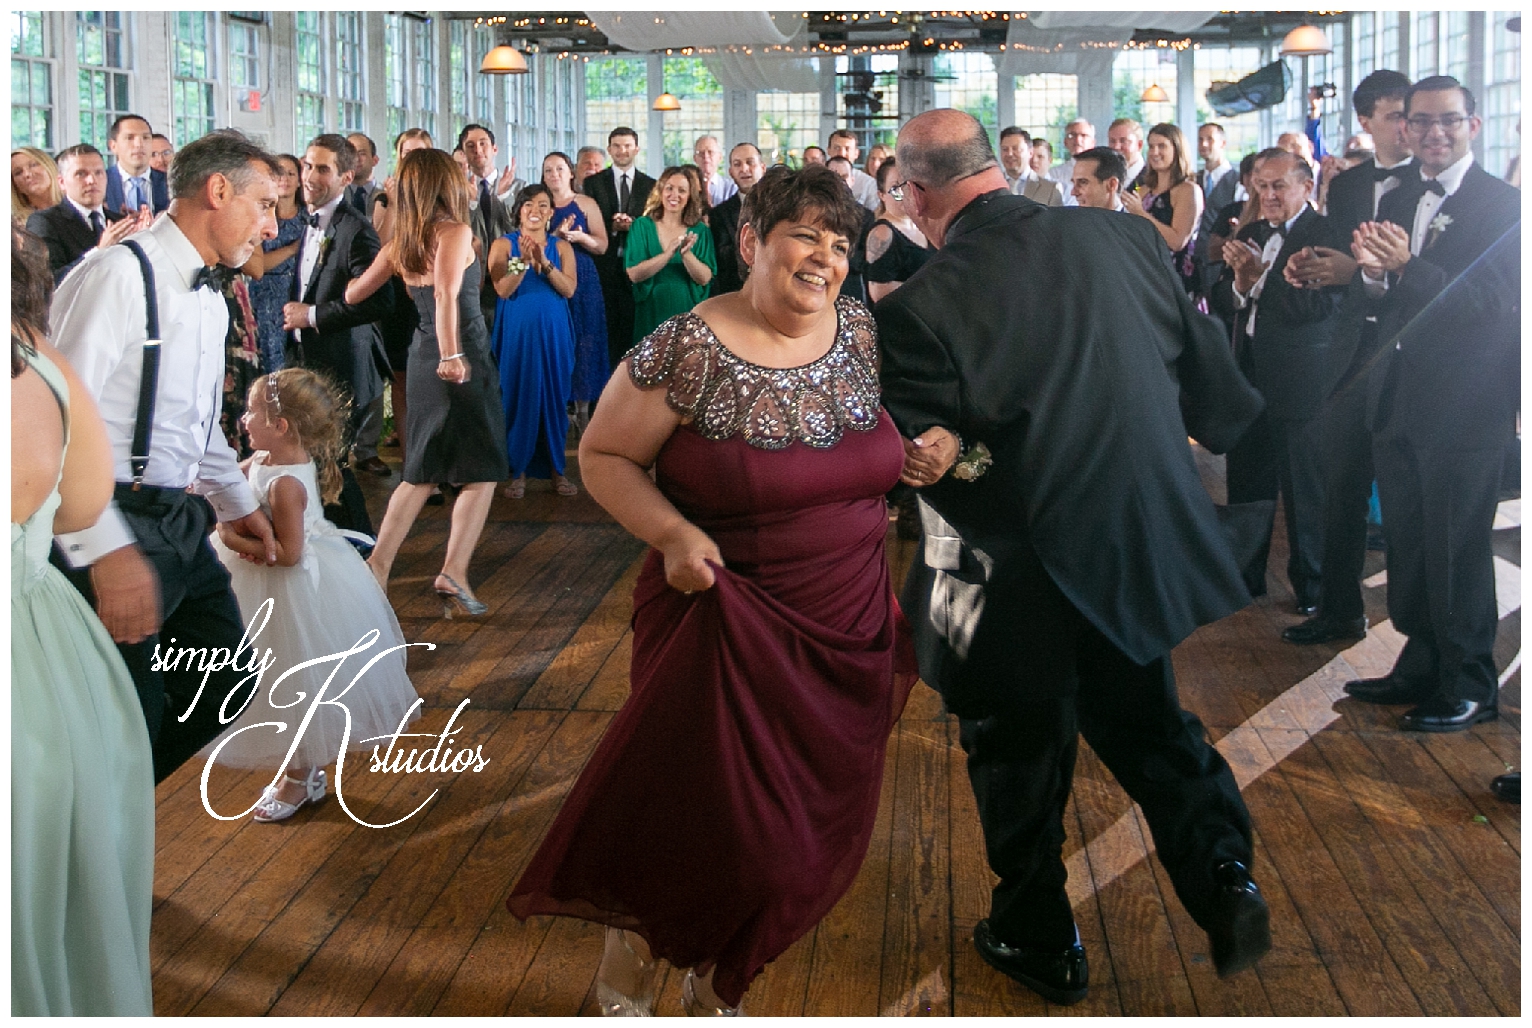 Dancing at The Lace Factory Wedding.jpg